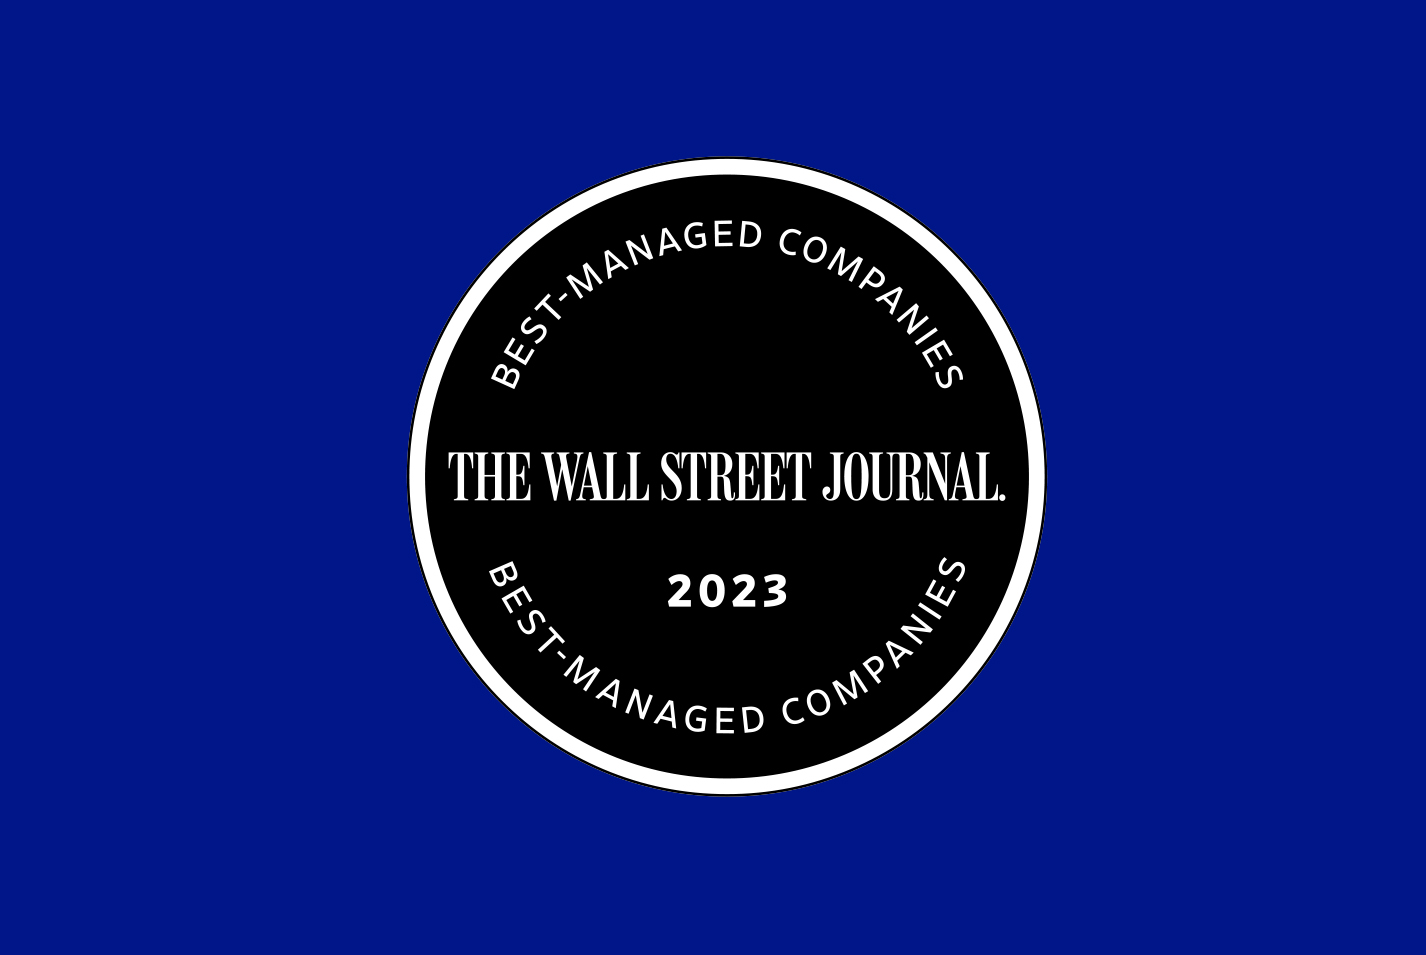 Sempra recognized among the Best-Managed Companies by The Wall Street Journal